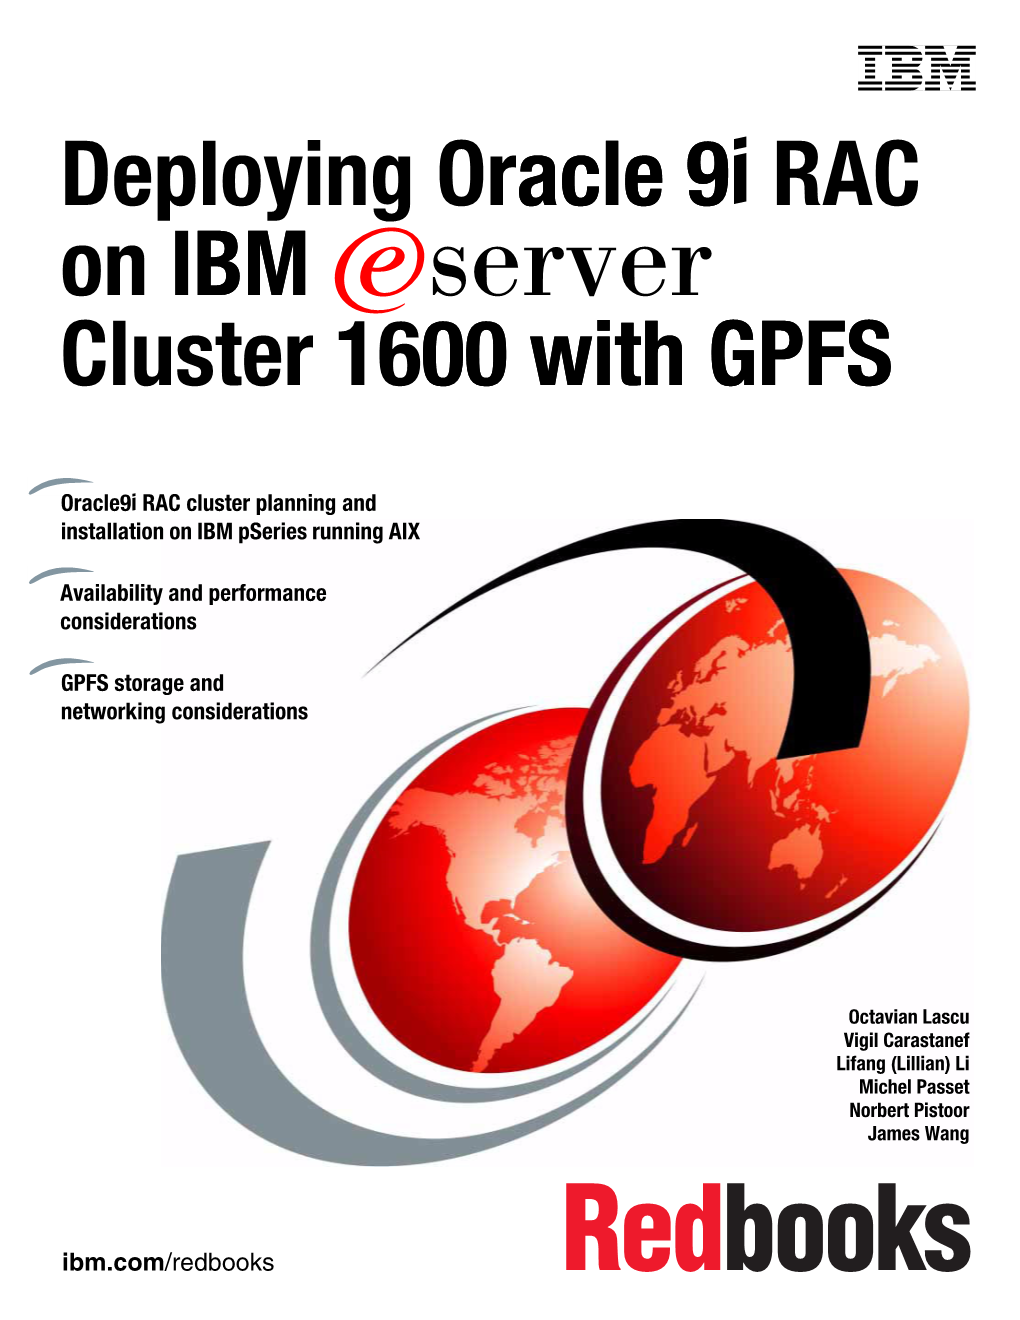 Deploying Oracle 9I RAC on IBM Eserver Cluster 1600 with GPFS 00